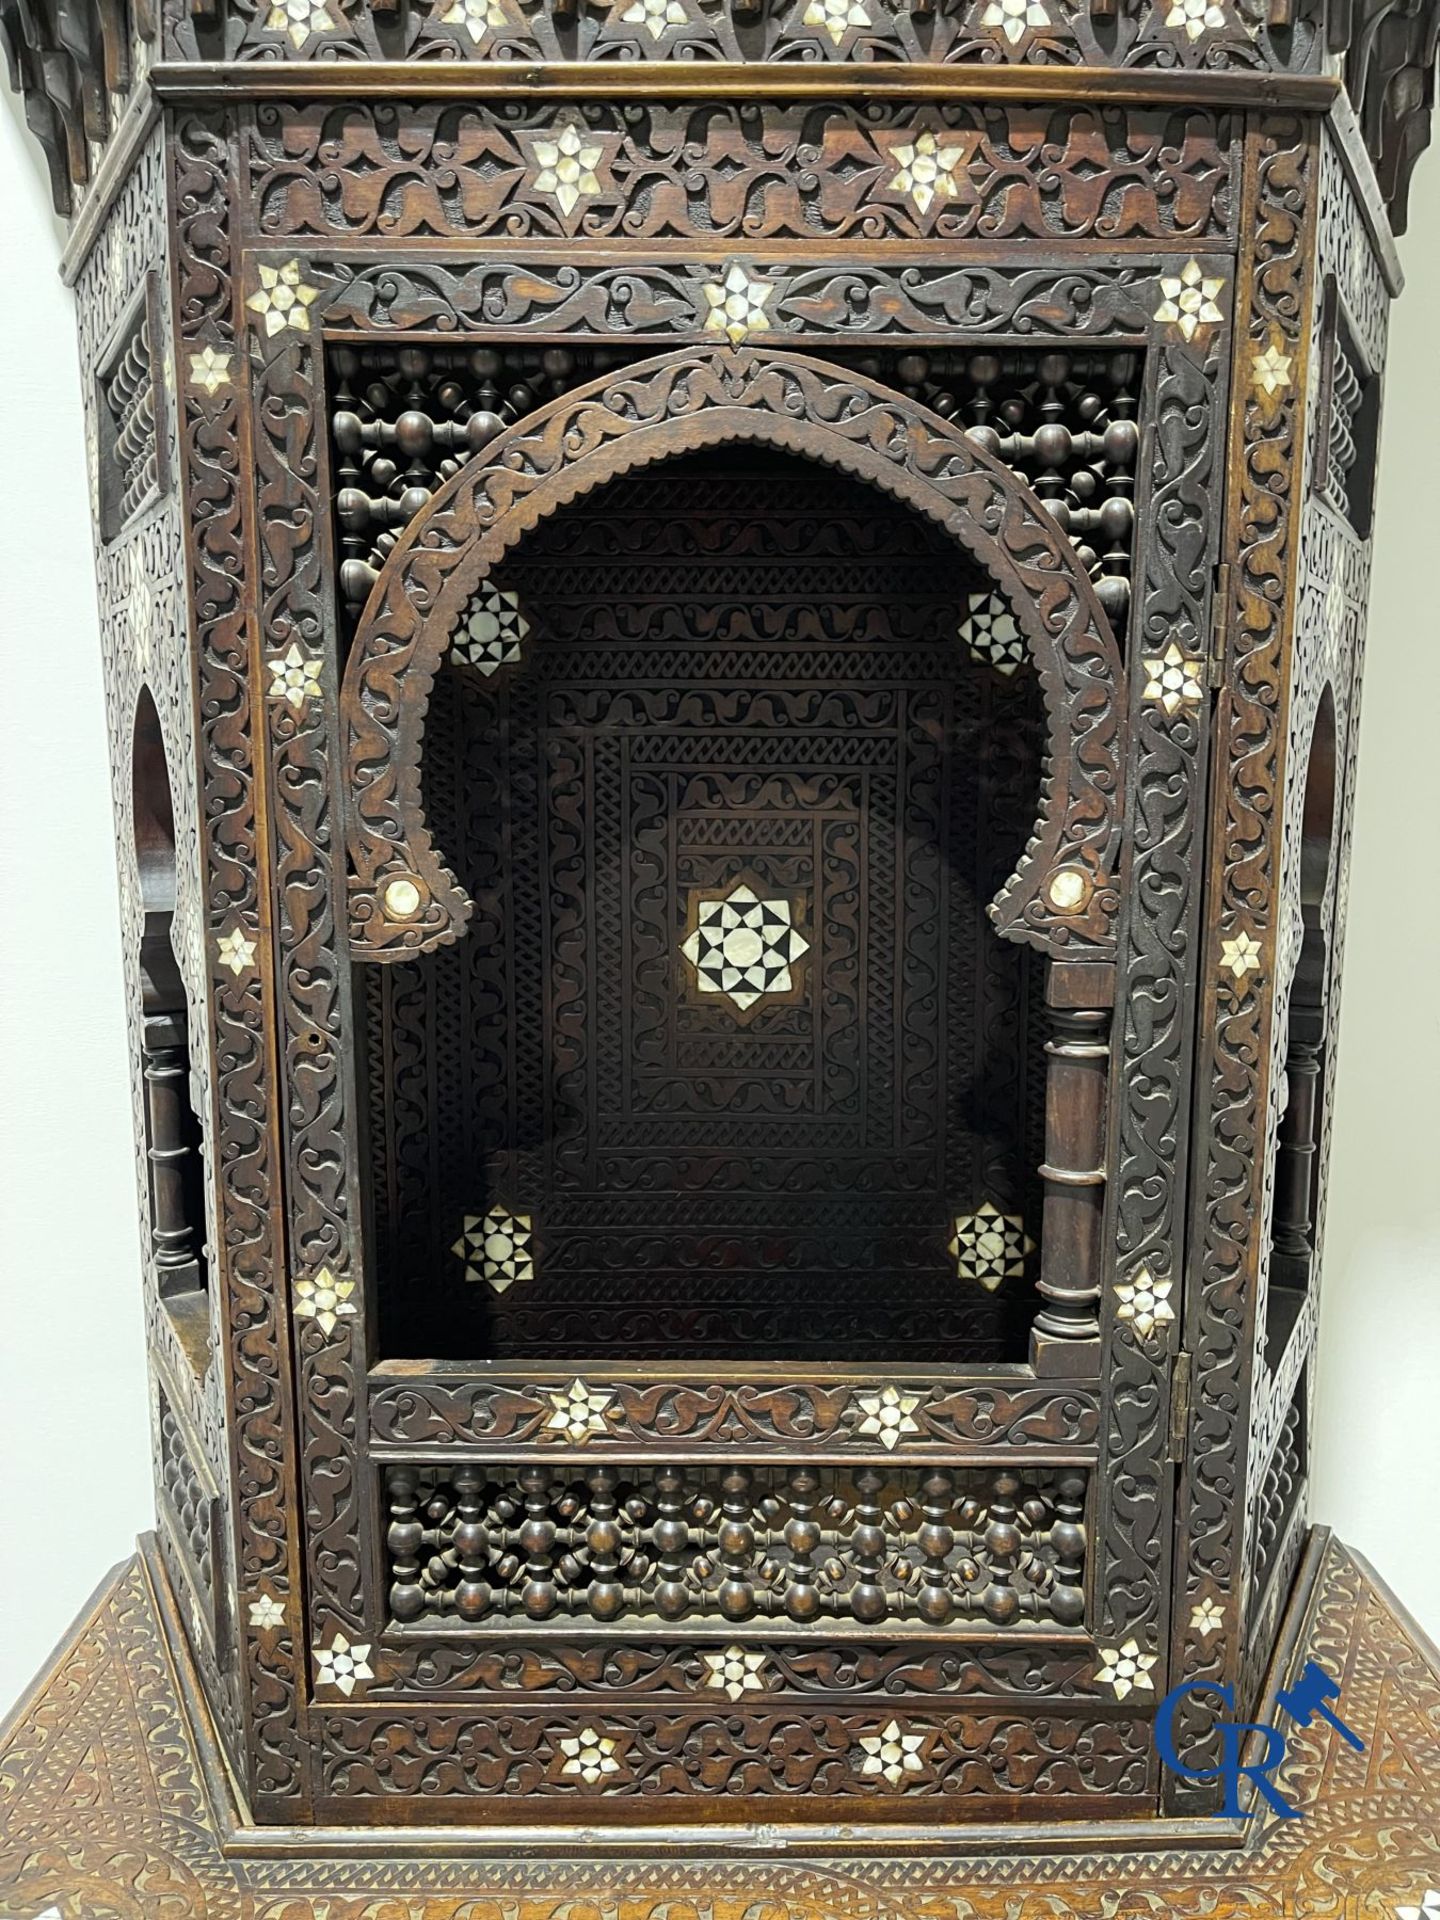 Sculpted furniture with inlays of ebony and mother-of-pearl. Syria, early 19th century. - Image 10 of 22